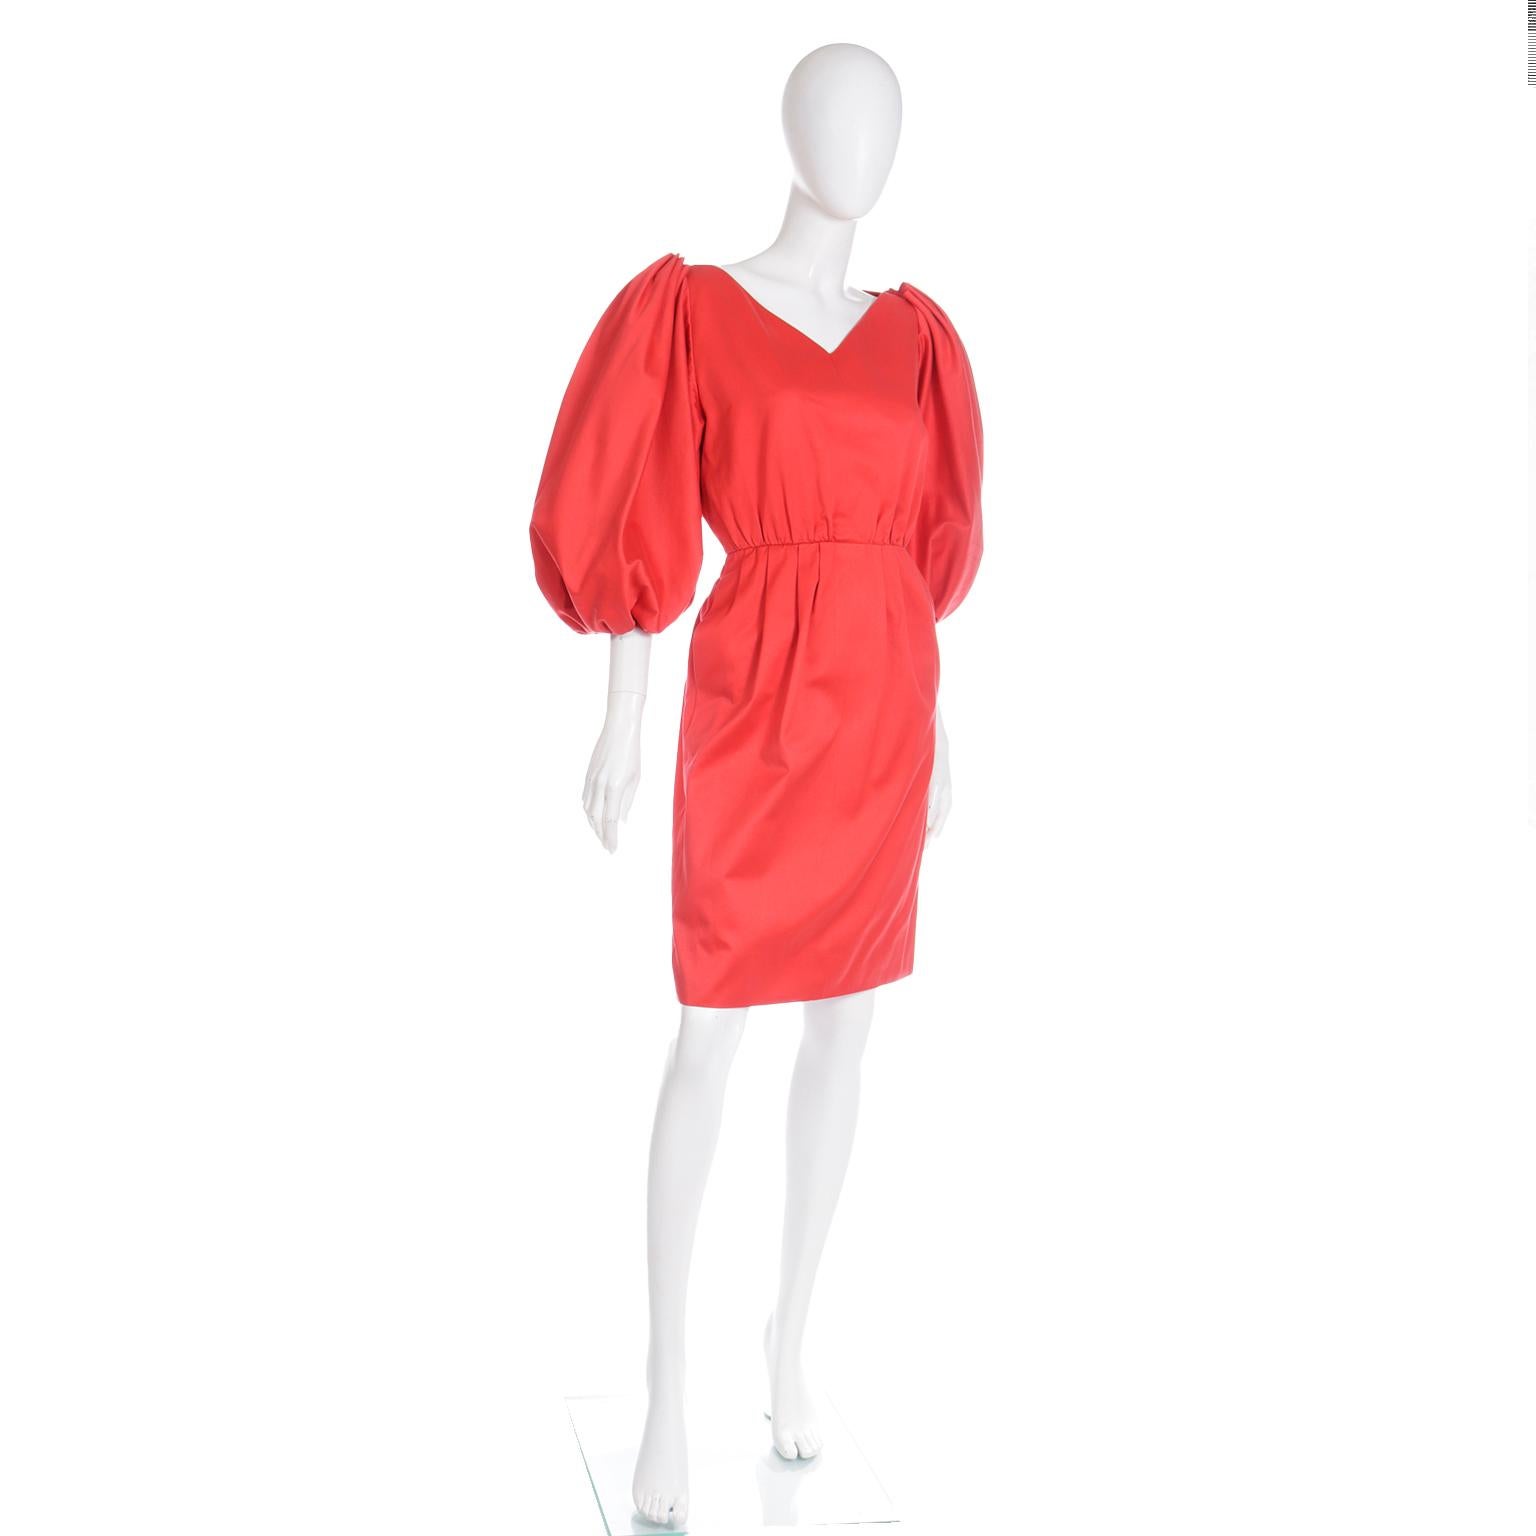 Women's Yves Saint Laurent 1989 Vintage Red Runway Dress with Puff Statement Sleeves